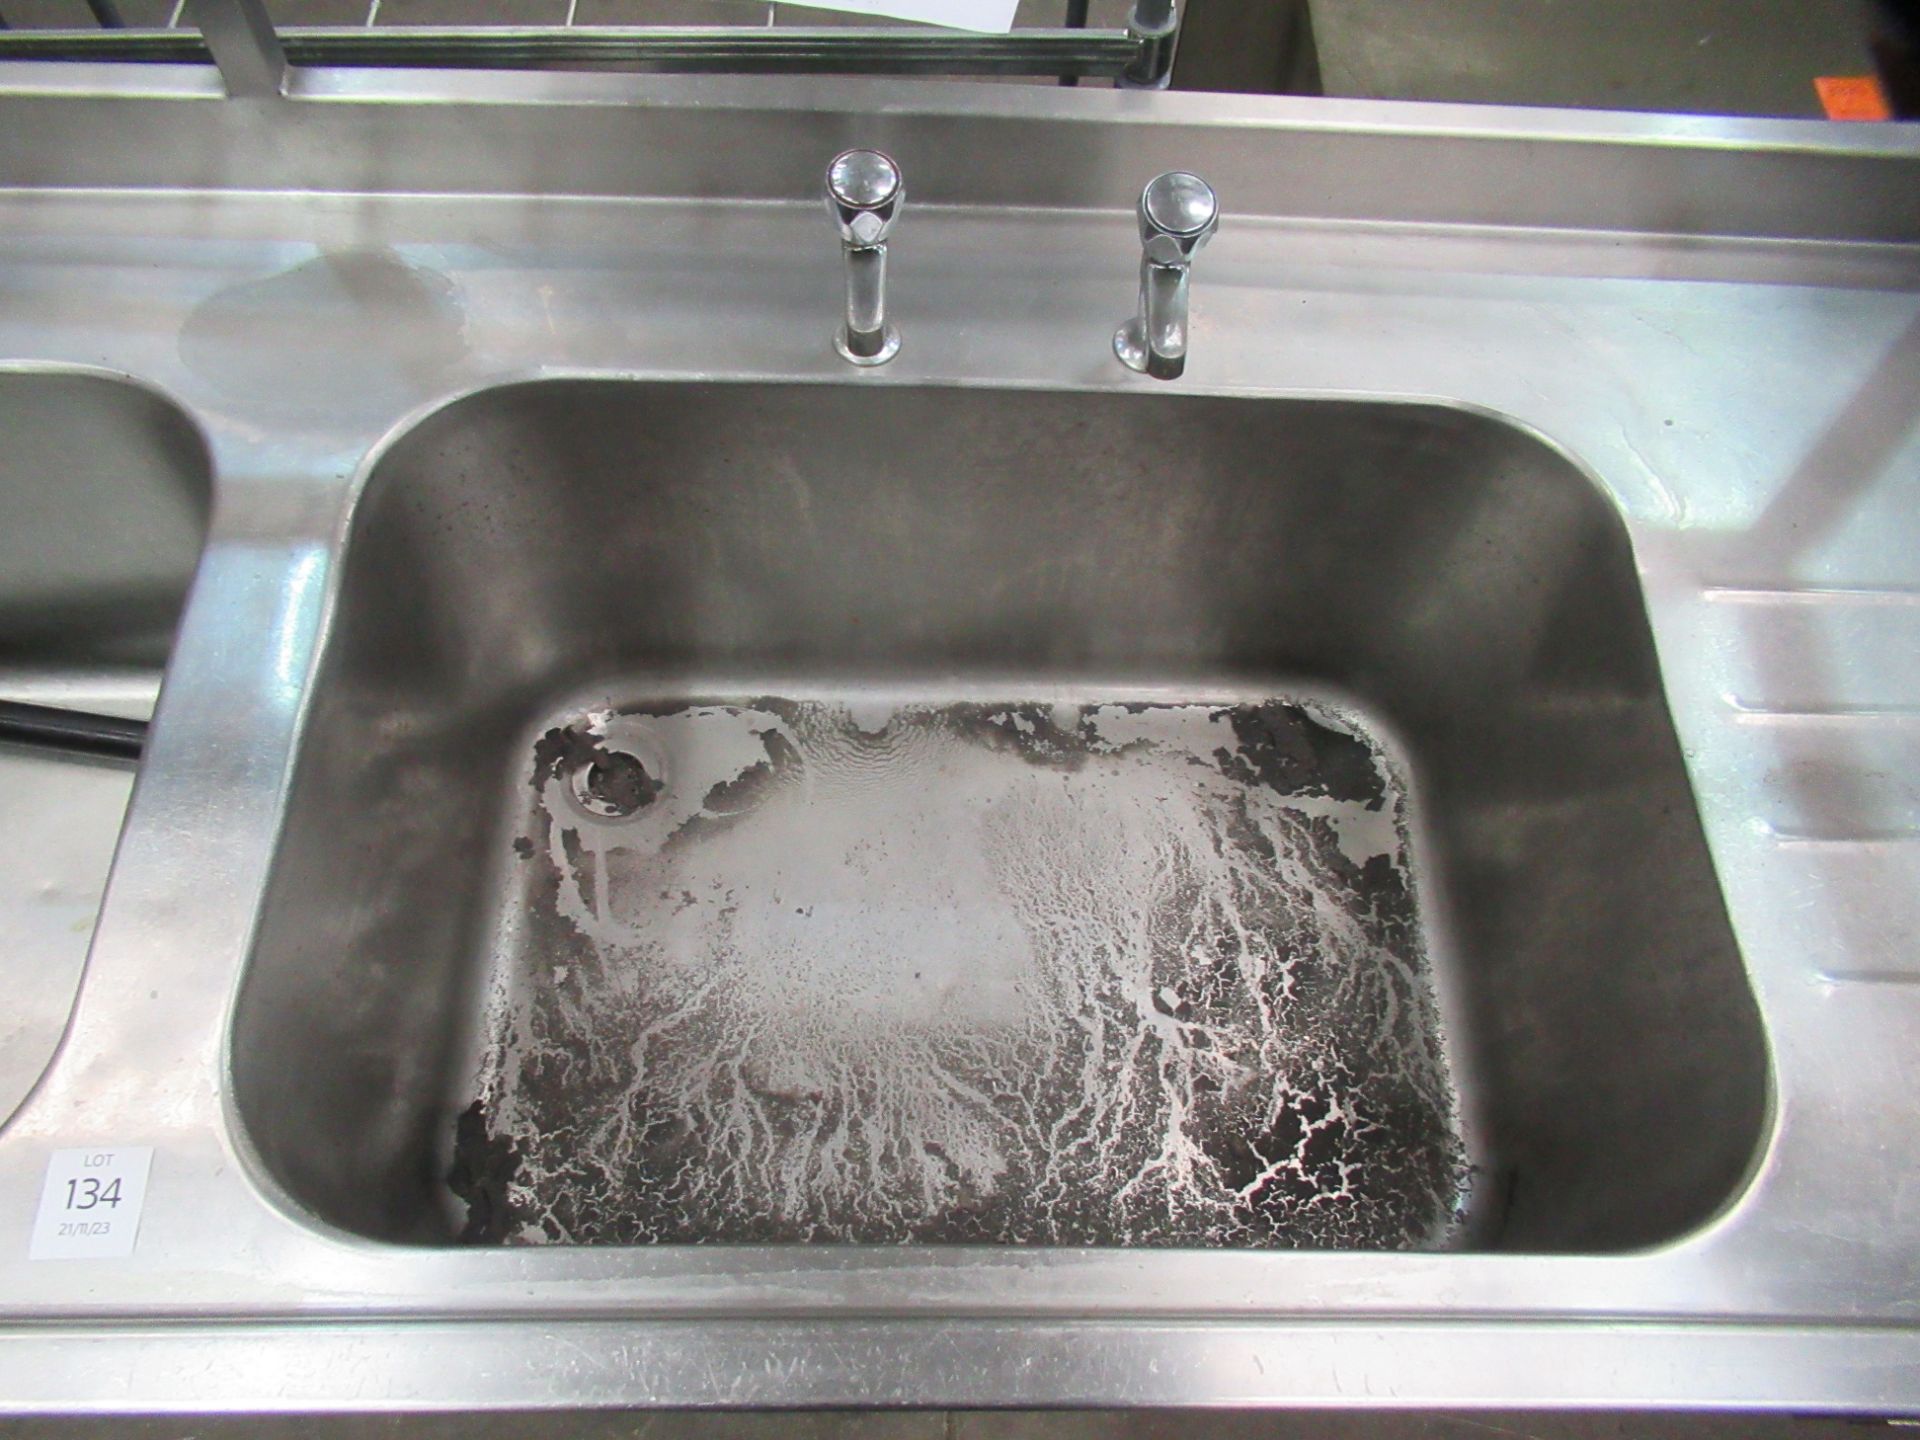 Large Stainless Steel Double Basin Sink Unit With Welded Rack & Under Tier - Image 4 of 4